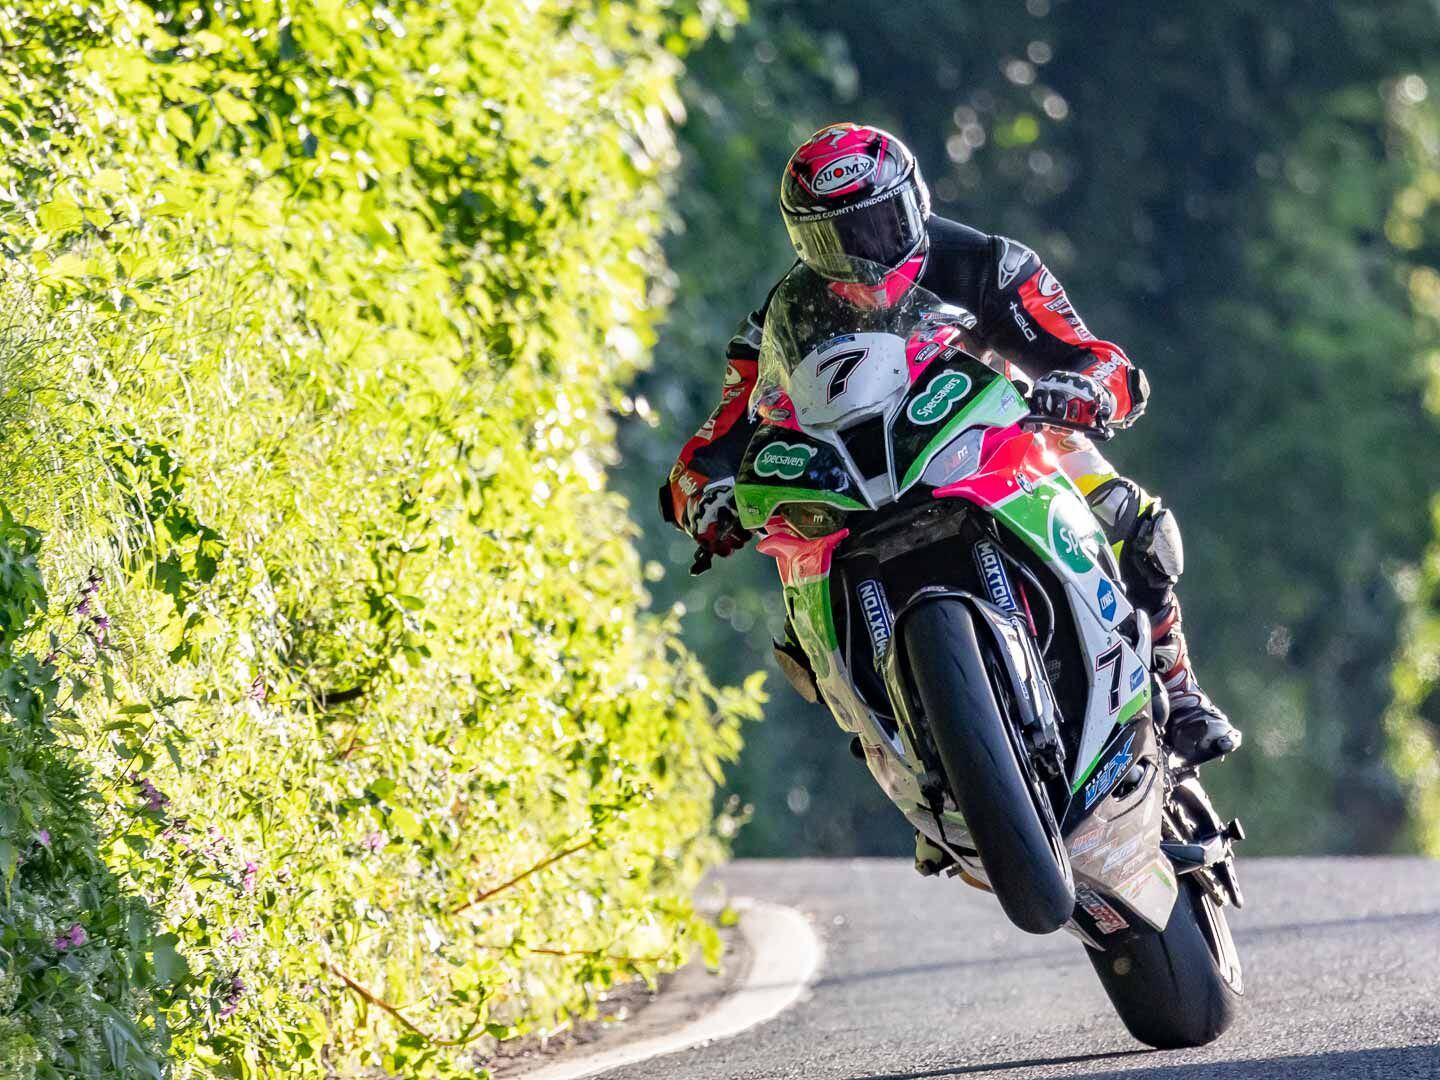 Gary Johnson, always competitive in the TT Superbike and Superstock events, seen here on his 2022 BMW S 1000 RR powered by Specsavers.